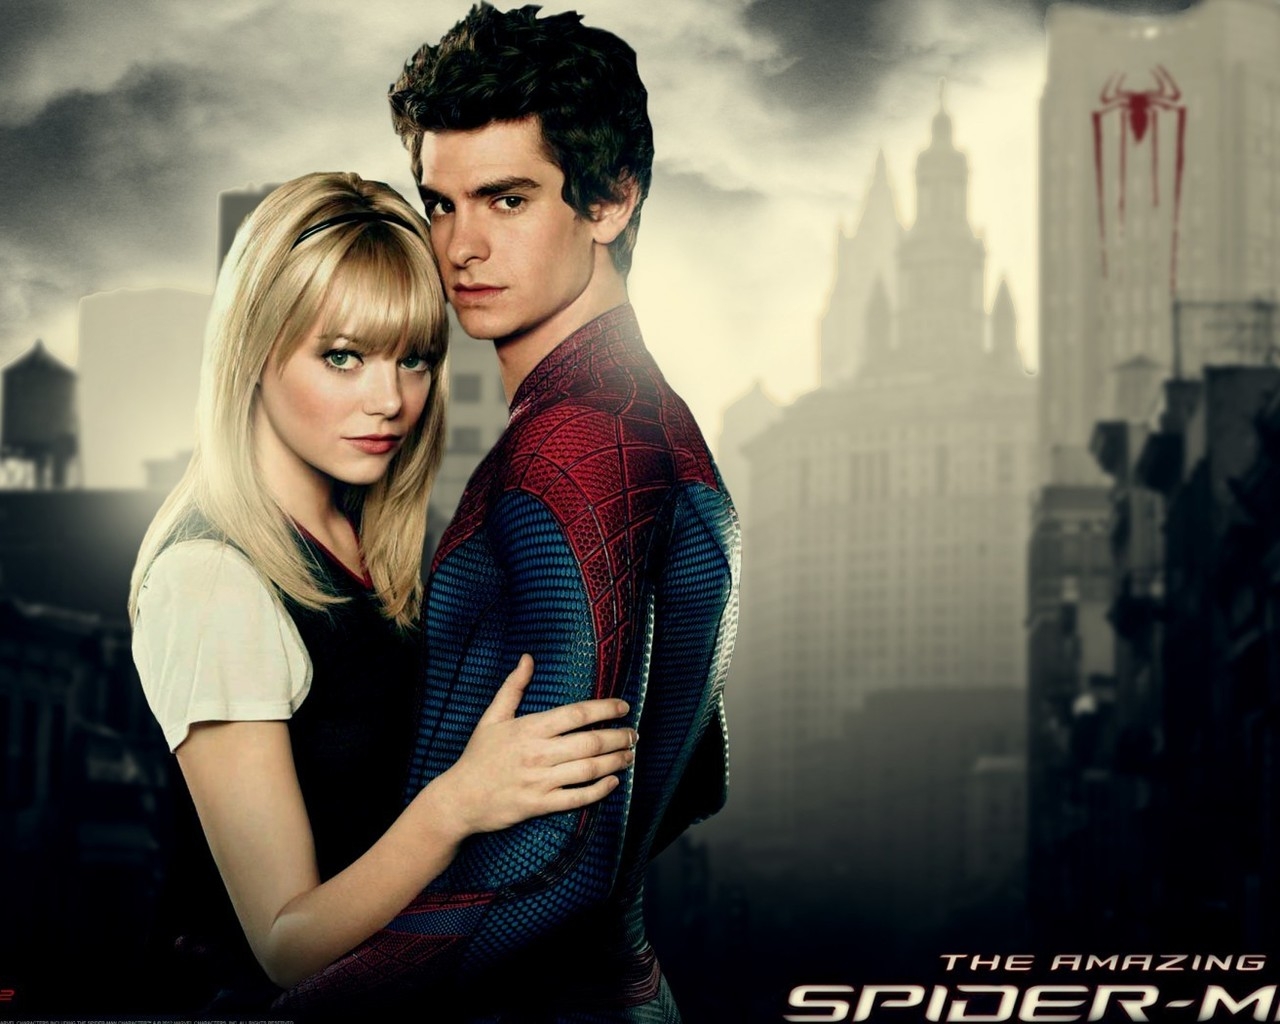 The Amazing Spider-Man Poster for 1280 x 1024 resolution